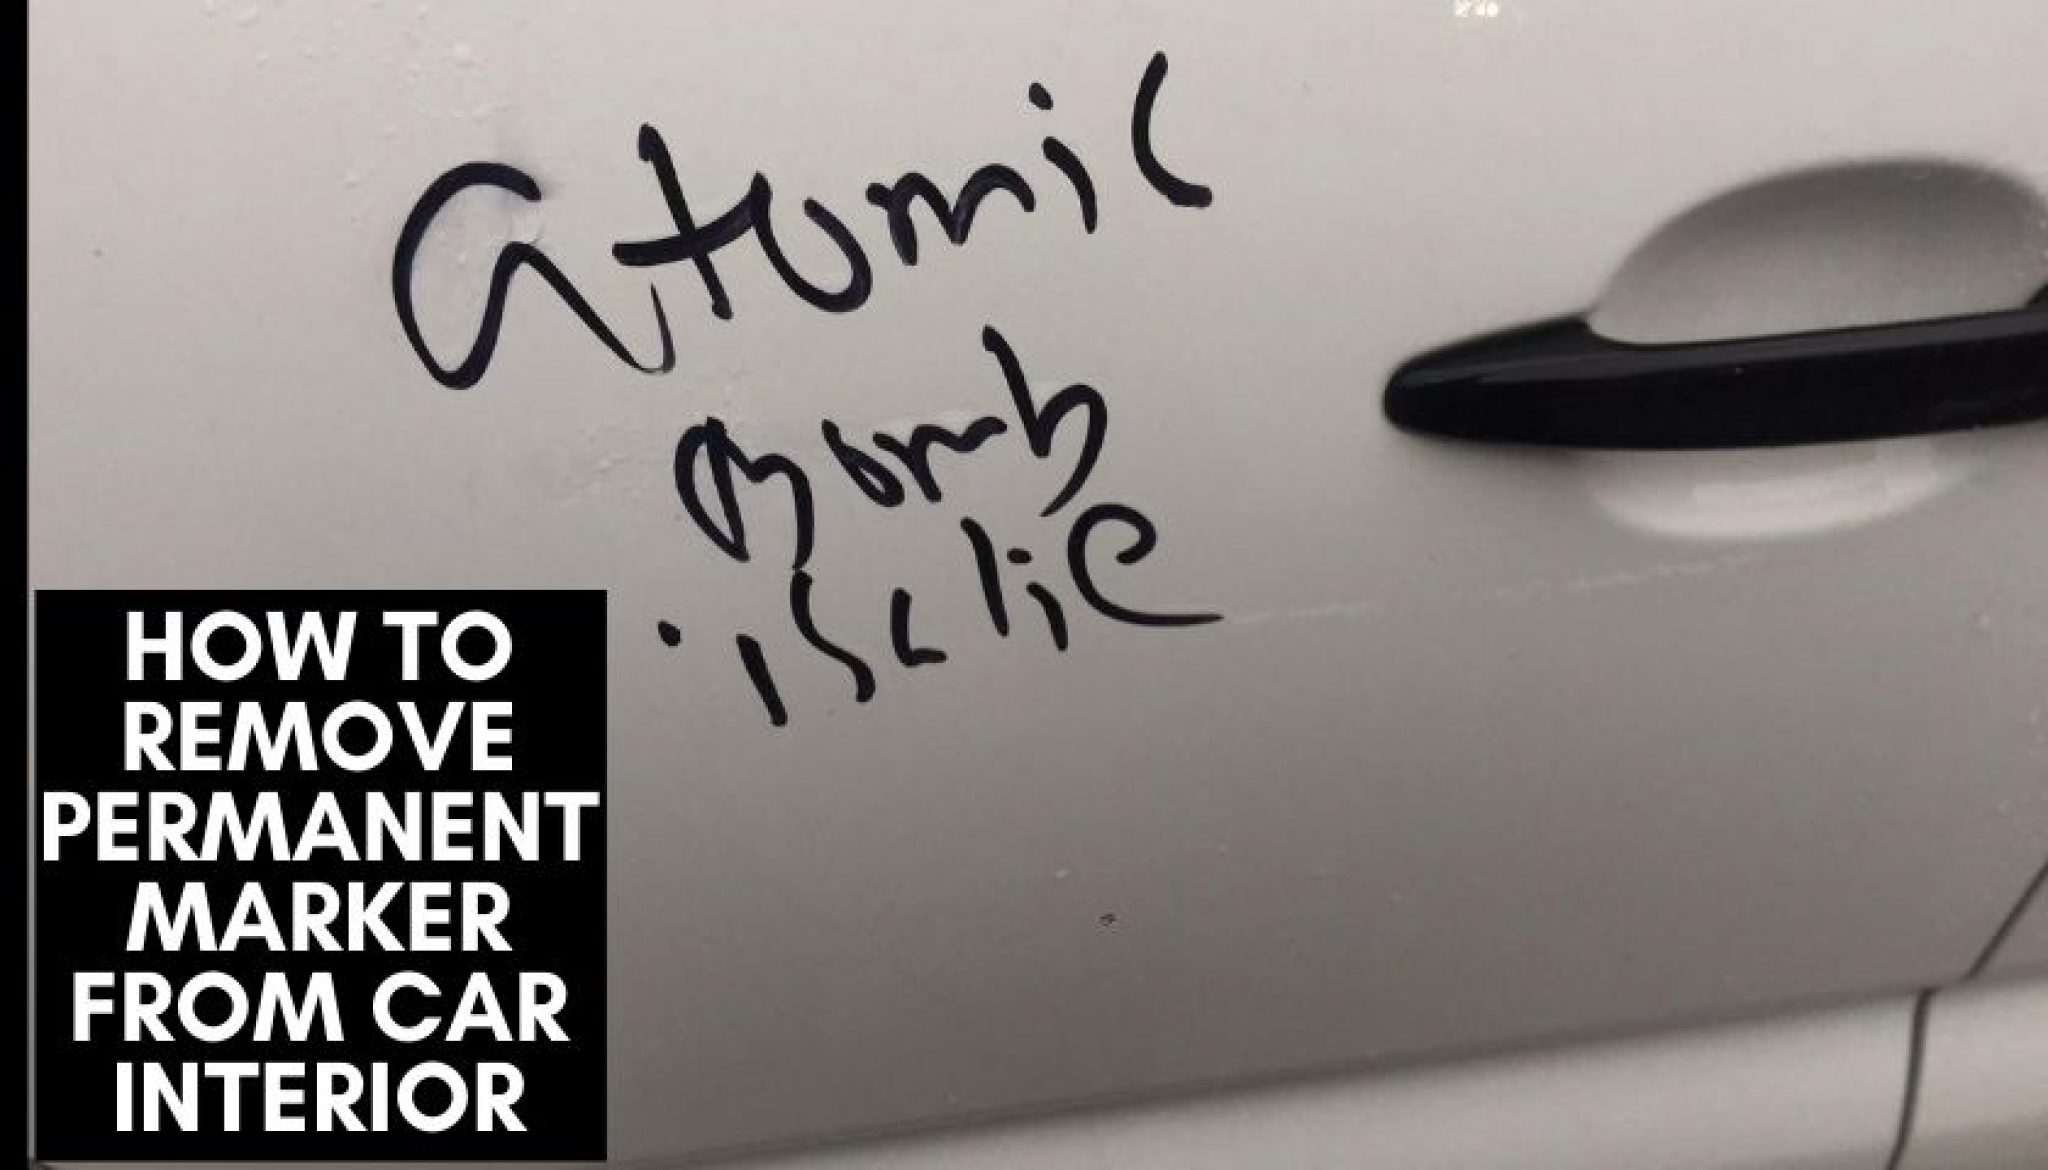 How to Remove Permanent Marker From Car Interior | 8 Ways